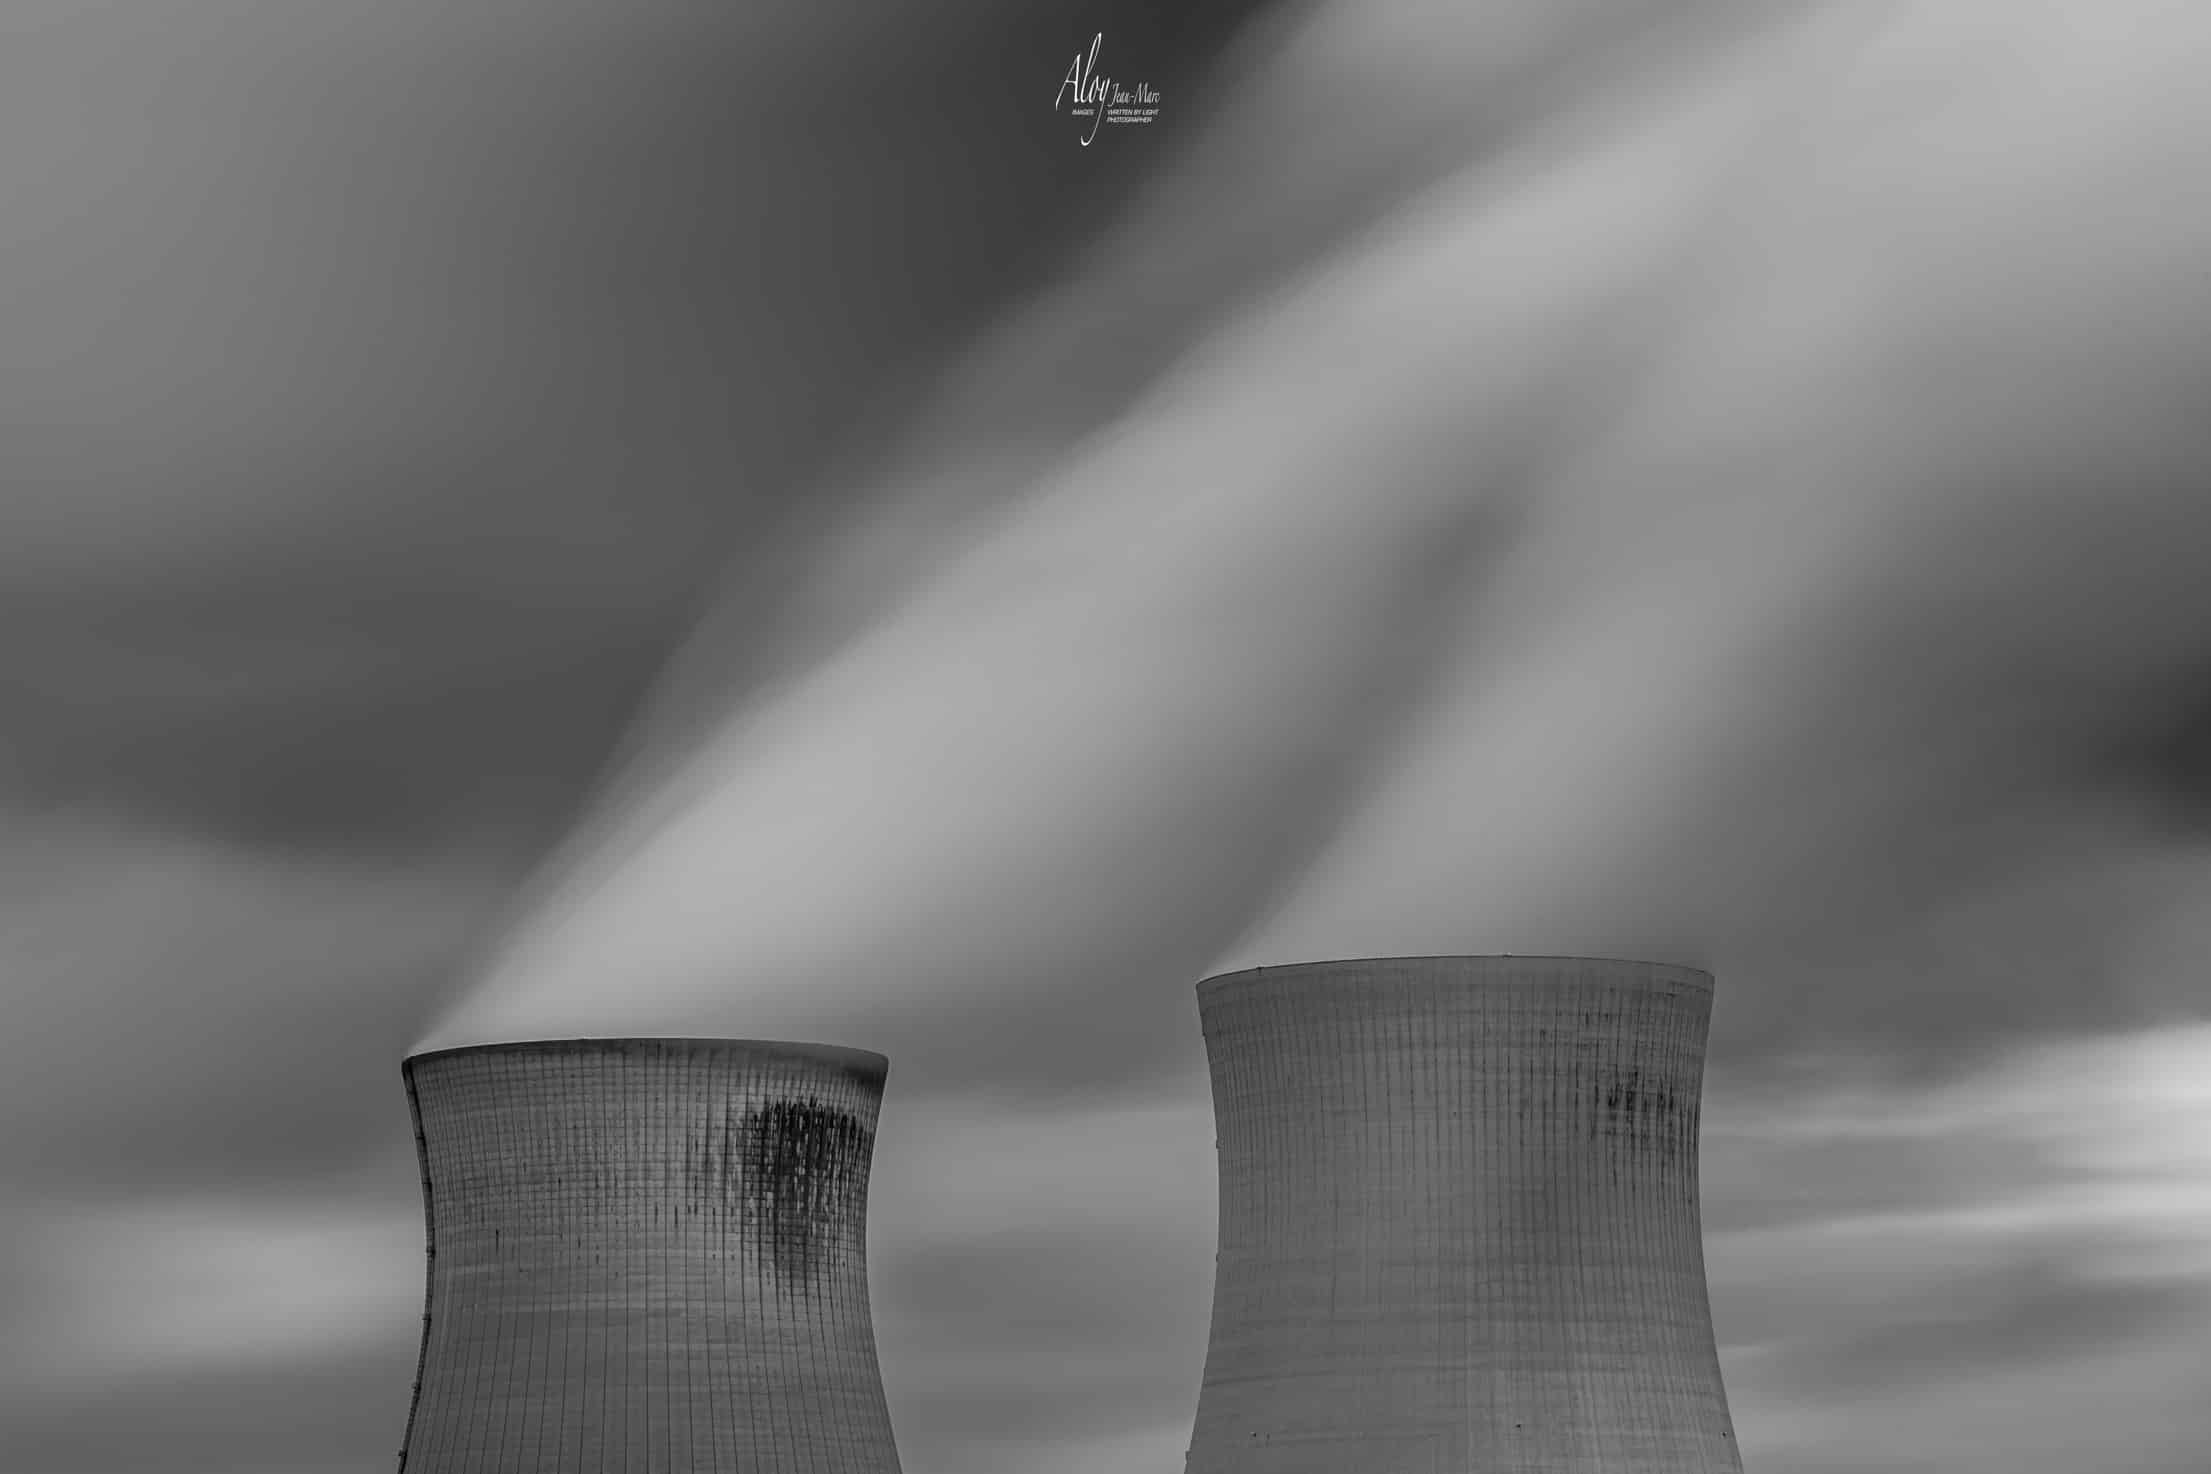 Cooling Towers